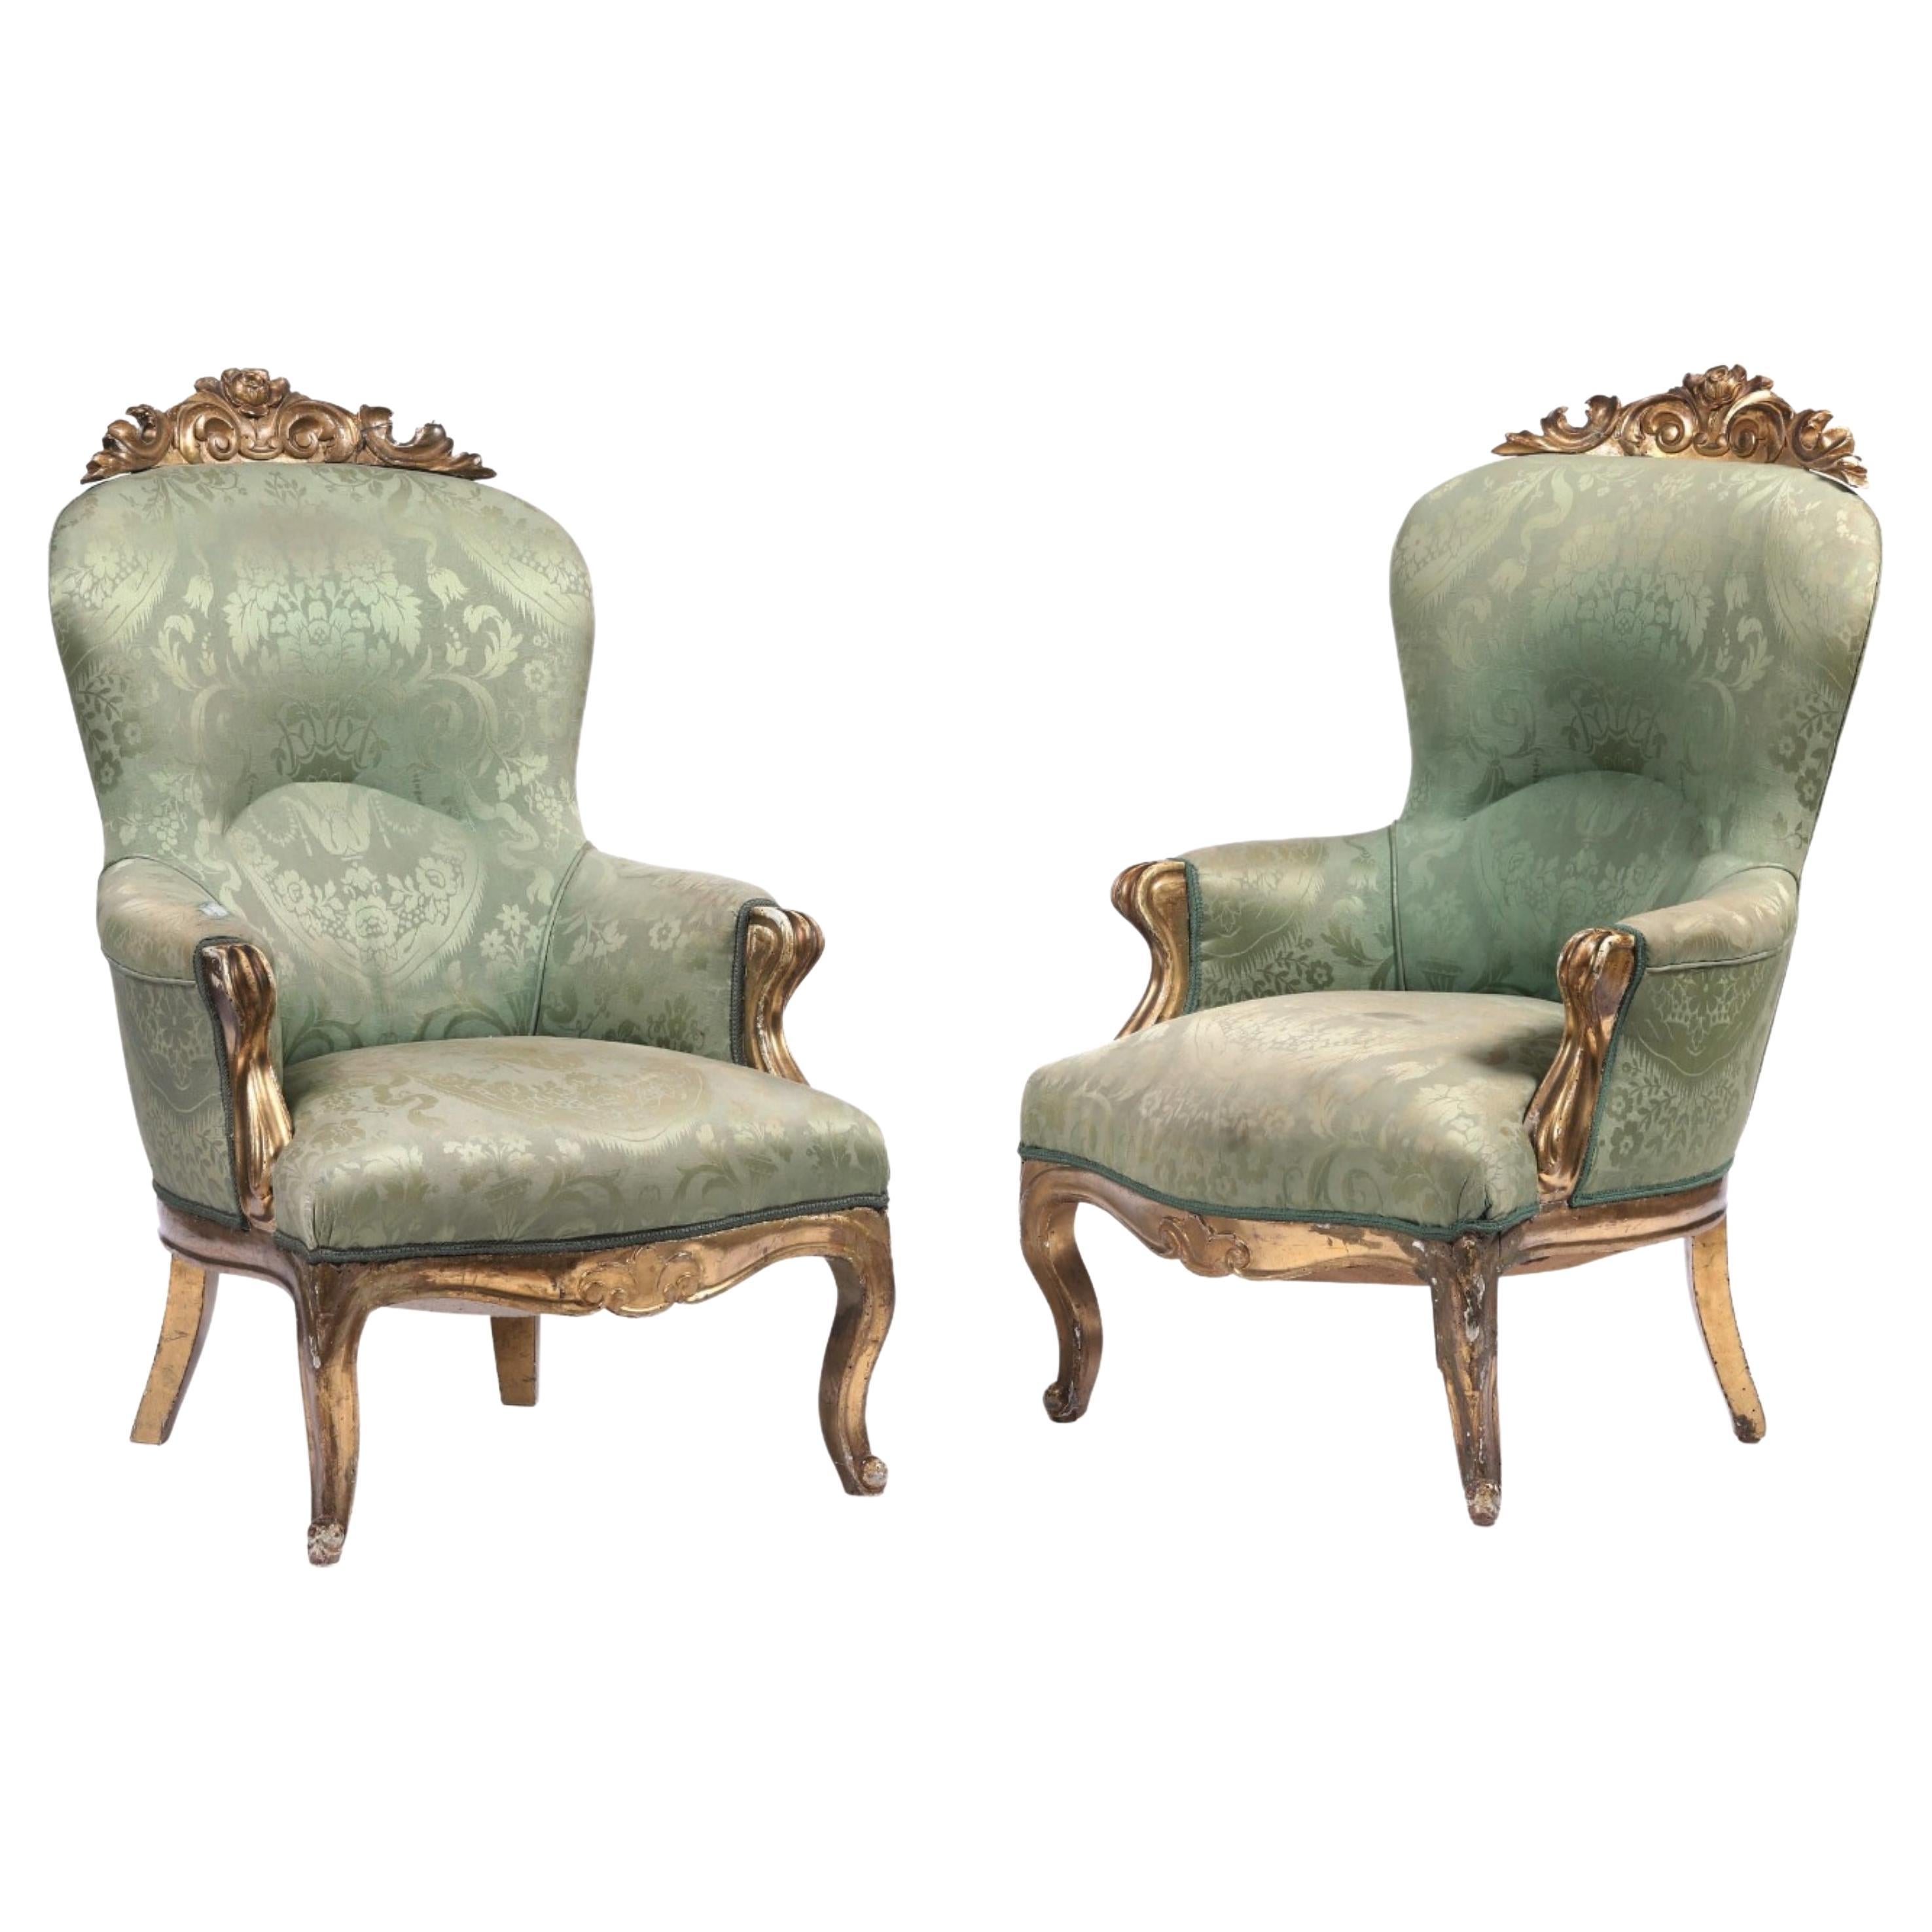 Pair of Italian Armchairs in Carved and Gilded Wood 19th Century For Sale